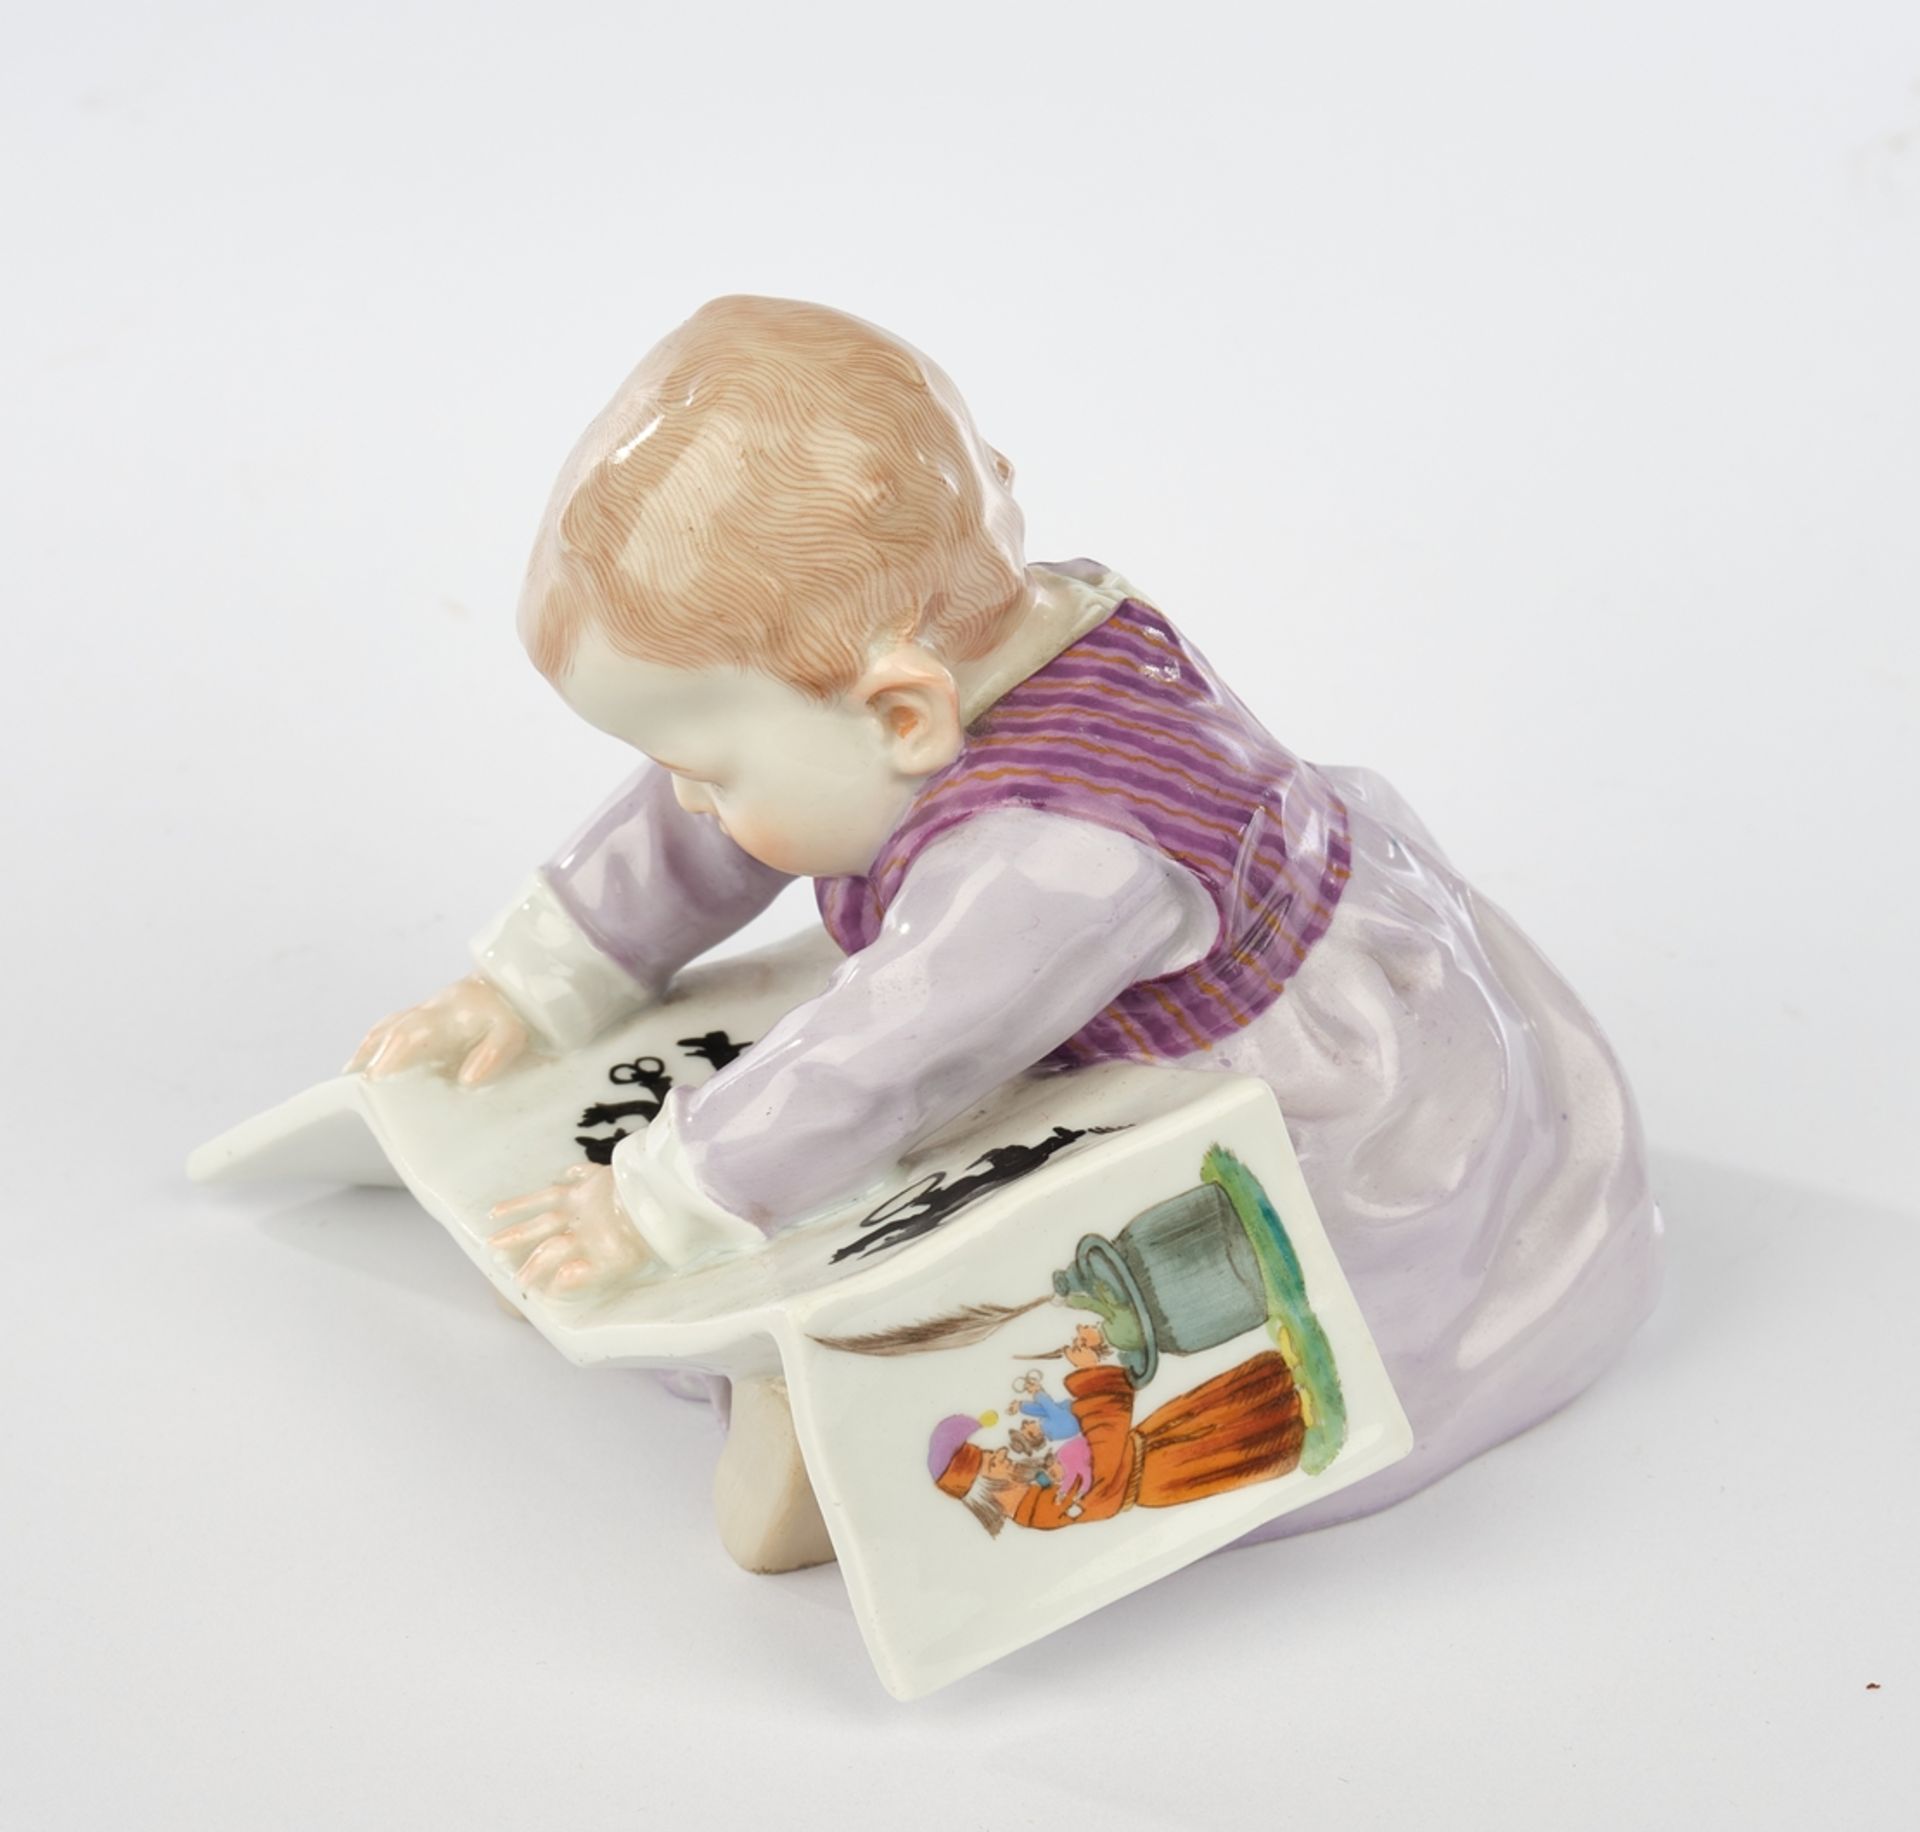 Porcelain figurine, , "Child with picture book, large", Meissen, sword mark, 1904-1924, 1st choice,